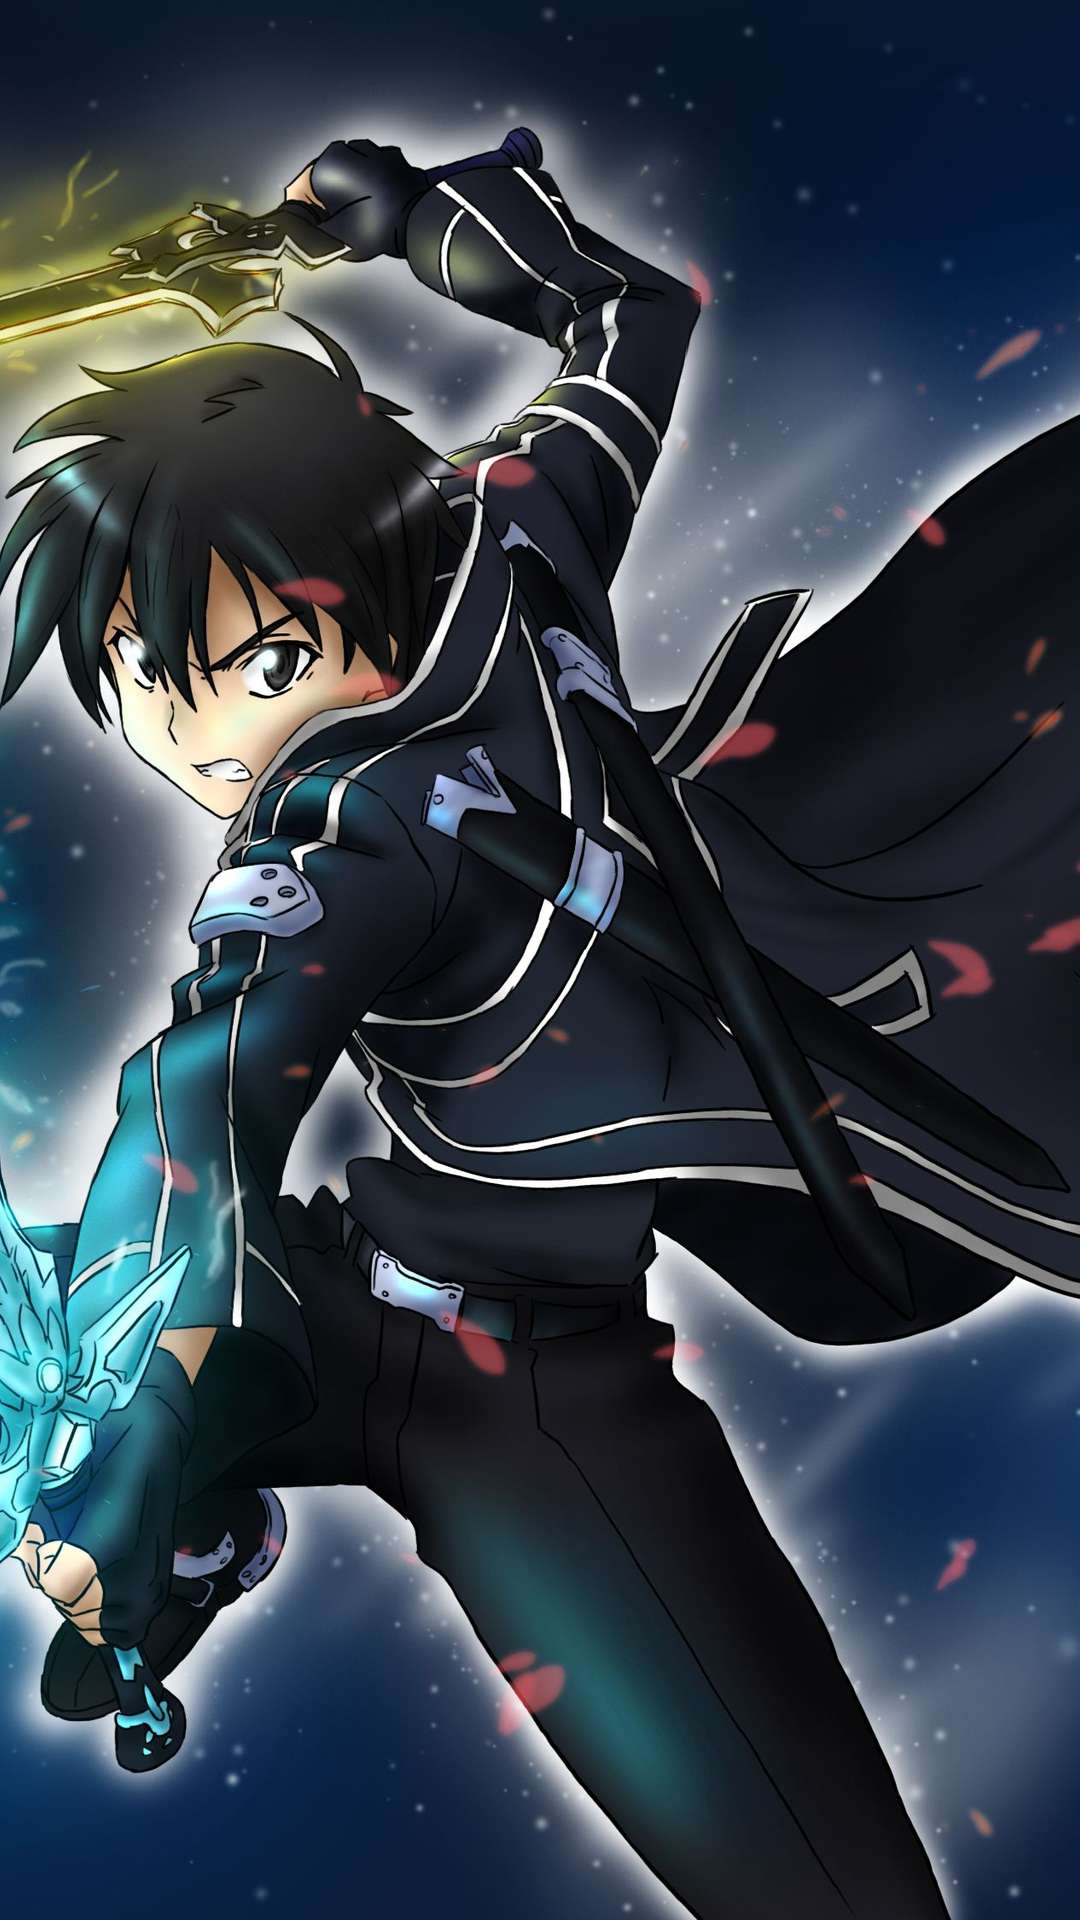 SAO Anime Wallpaper:Amazon.com:Appstore for Android